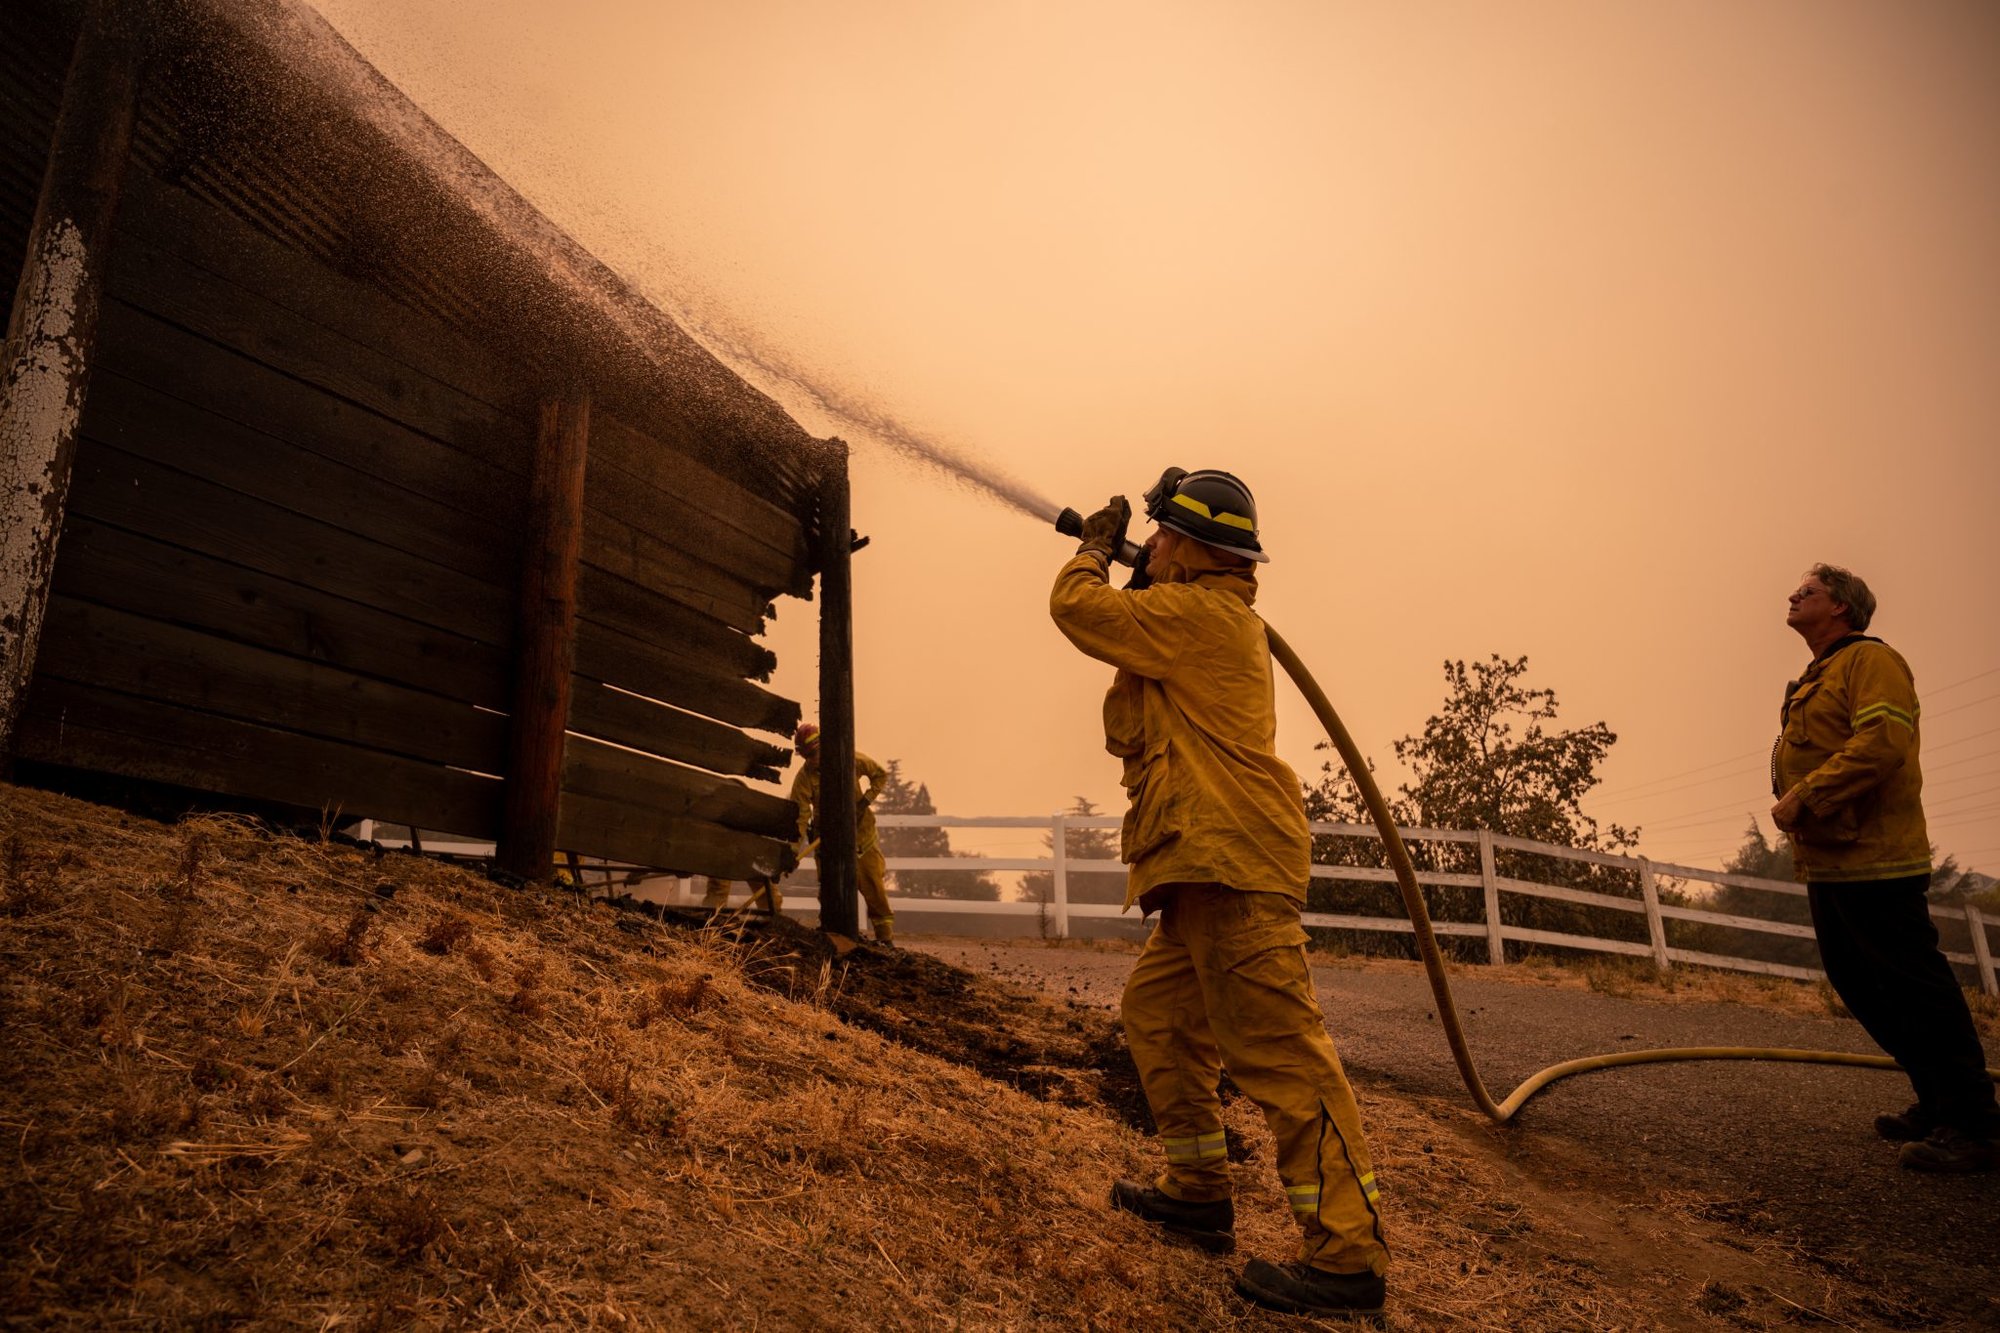 U.S. Air Force Airman 1st Class Ryan Girouex, 60th Civil Engineer Squadron firefighter, center, extinguishes a fire on a shed on Soaring Eagle Trail in Vacaville, California, Aug. 20, 2020. The 60th CES loaned 28 personnel and five trucks to aid in the fight against the LNU Lightning Complex Fire, a cluster of fires that forced tens of thousands of people to evacuate their homes. U.S. Air Force photo by Nicholas Pilch